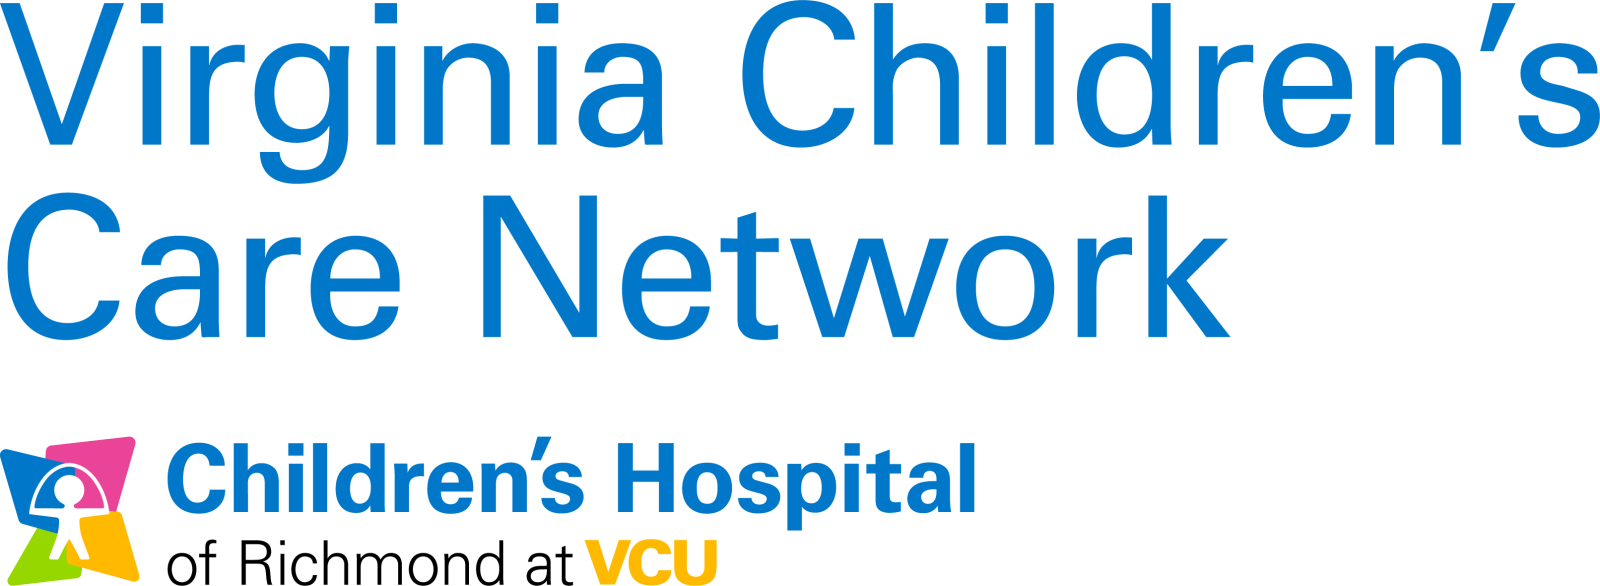 Virginia Childrens Care Network Childrens Hospital Of Richmond At Vcu